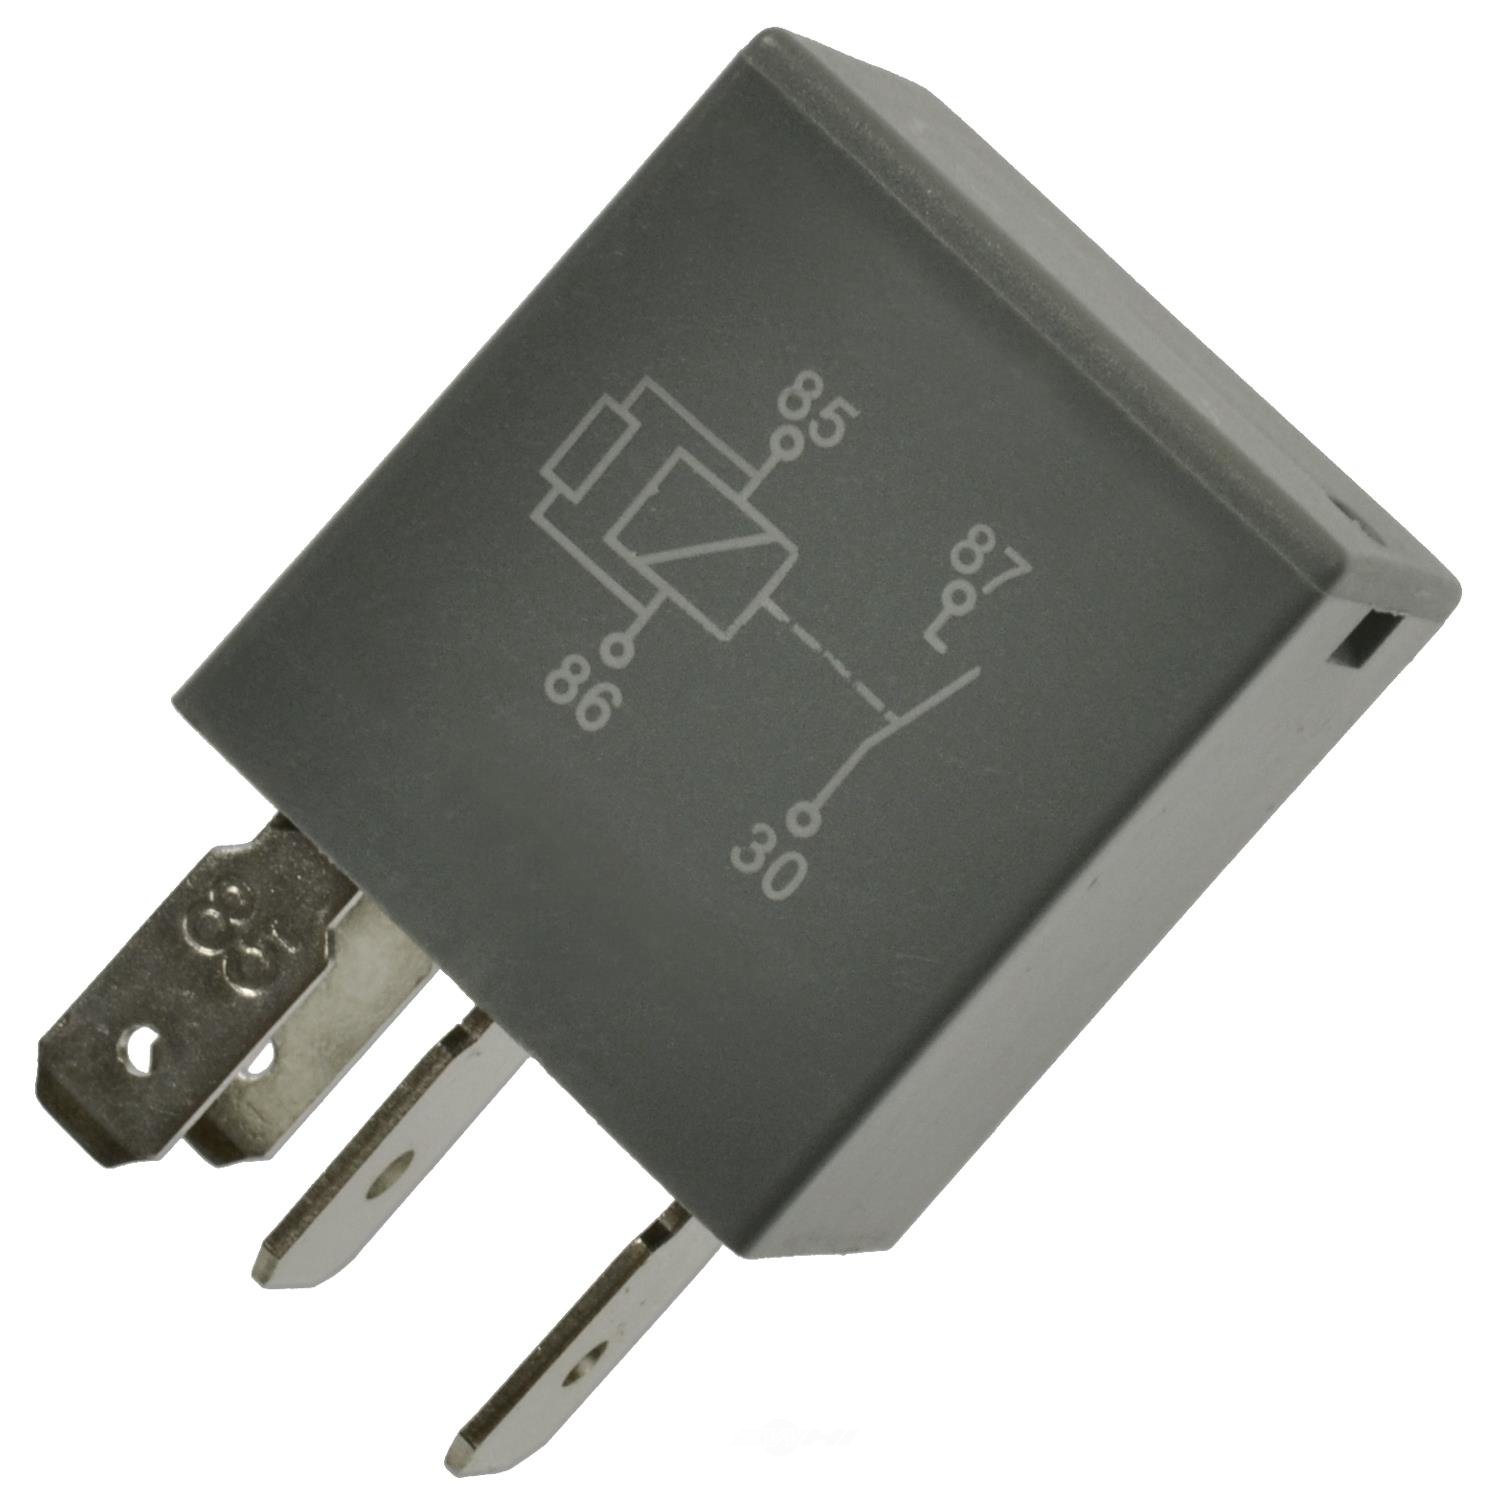 STANDARD T-SERIES - Accessory Safety Relay - STT RY302T